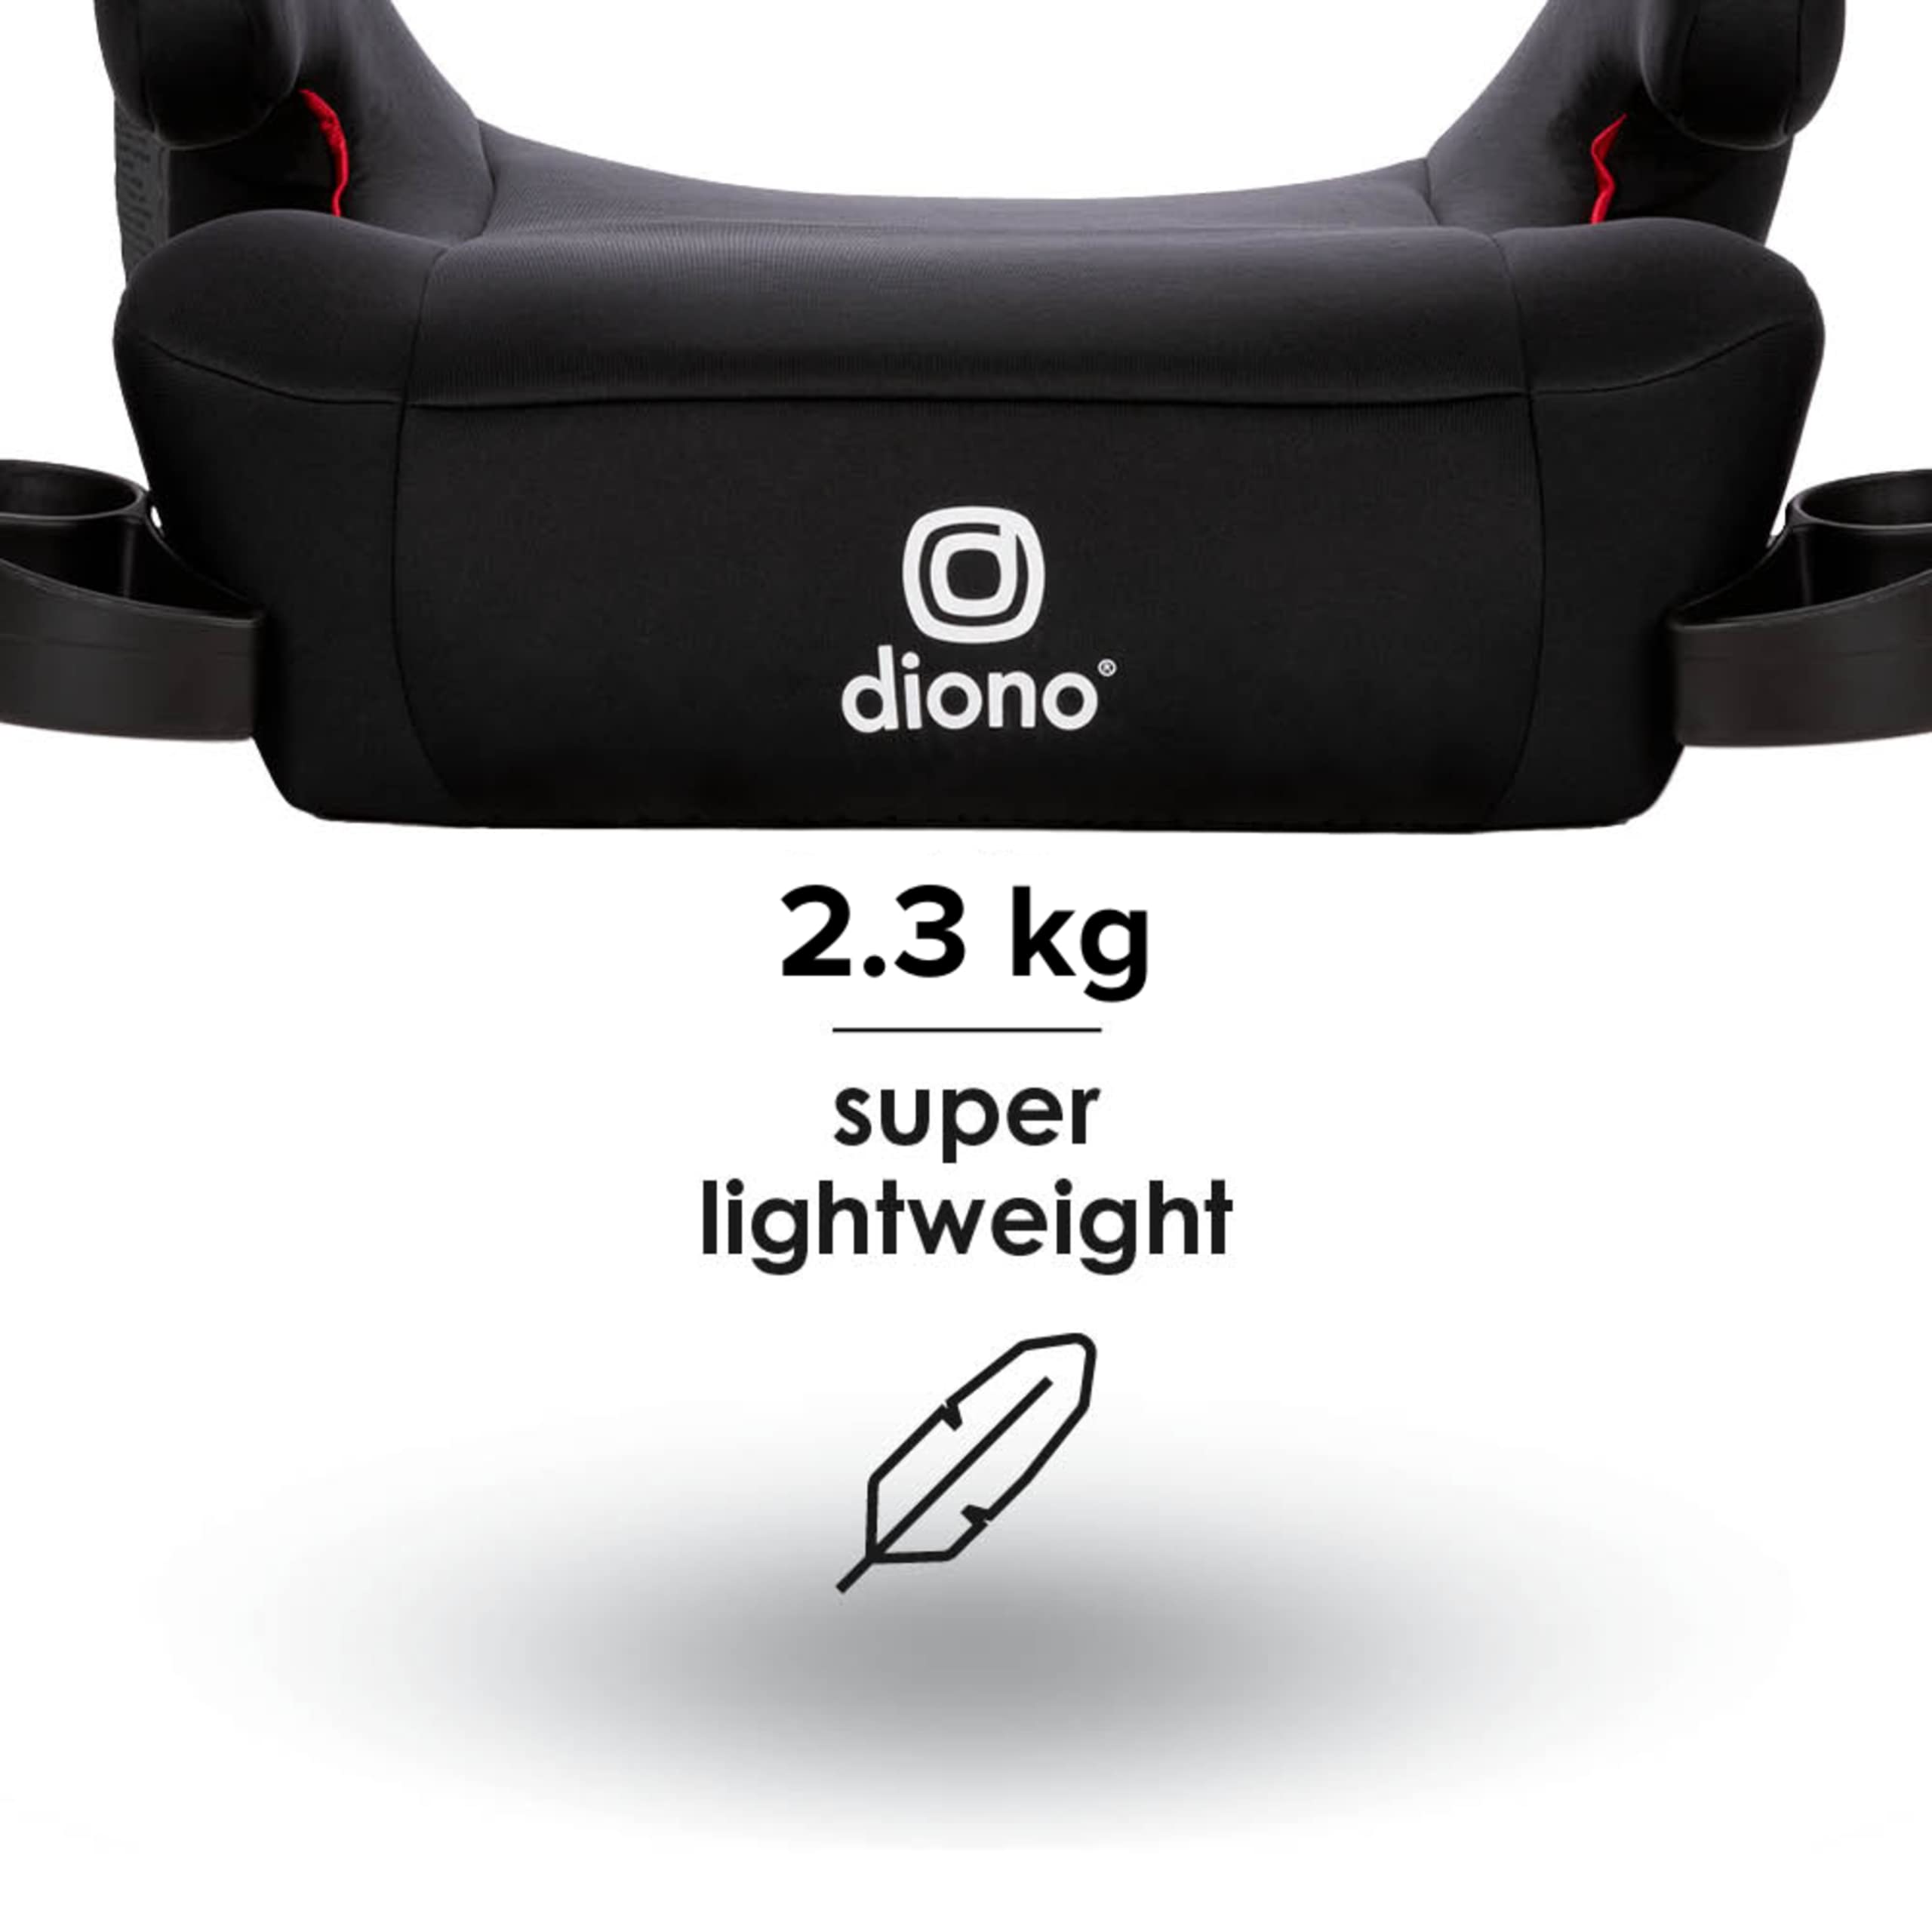 Diono Solana 2 No Latch, XL Lightweight Backless Belt-Positioning Booster Car Seat, 8 Years 1 Booster Seat, Black